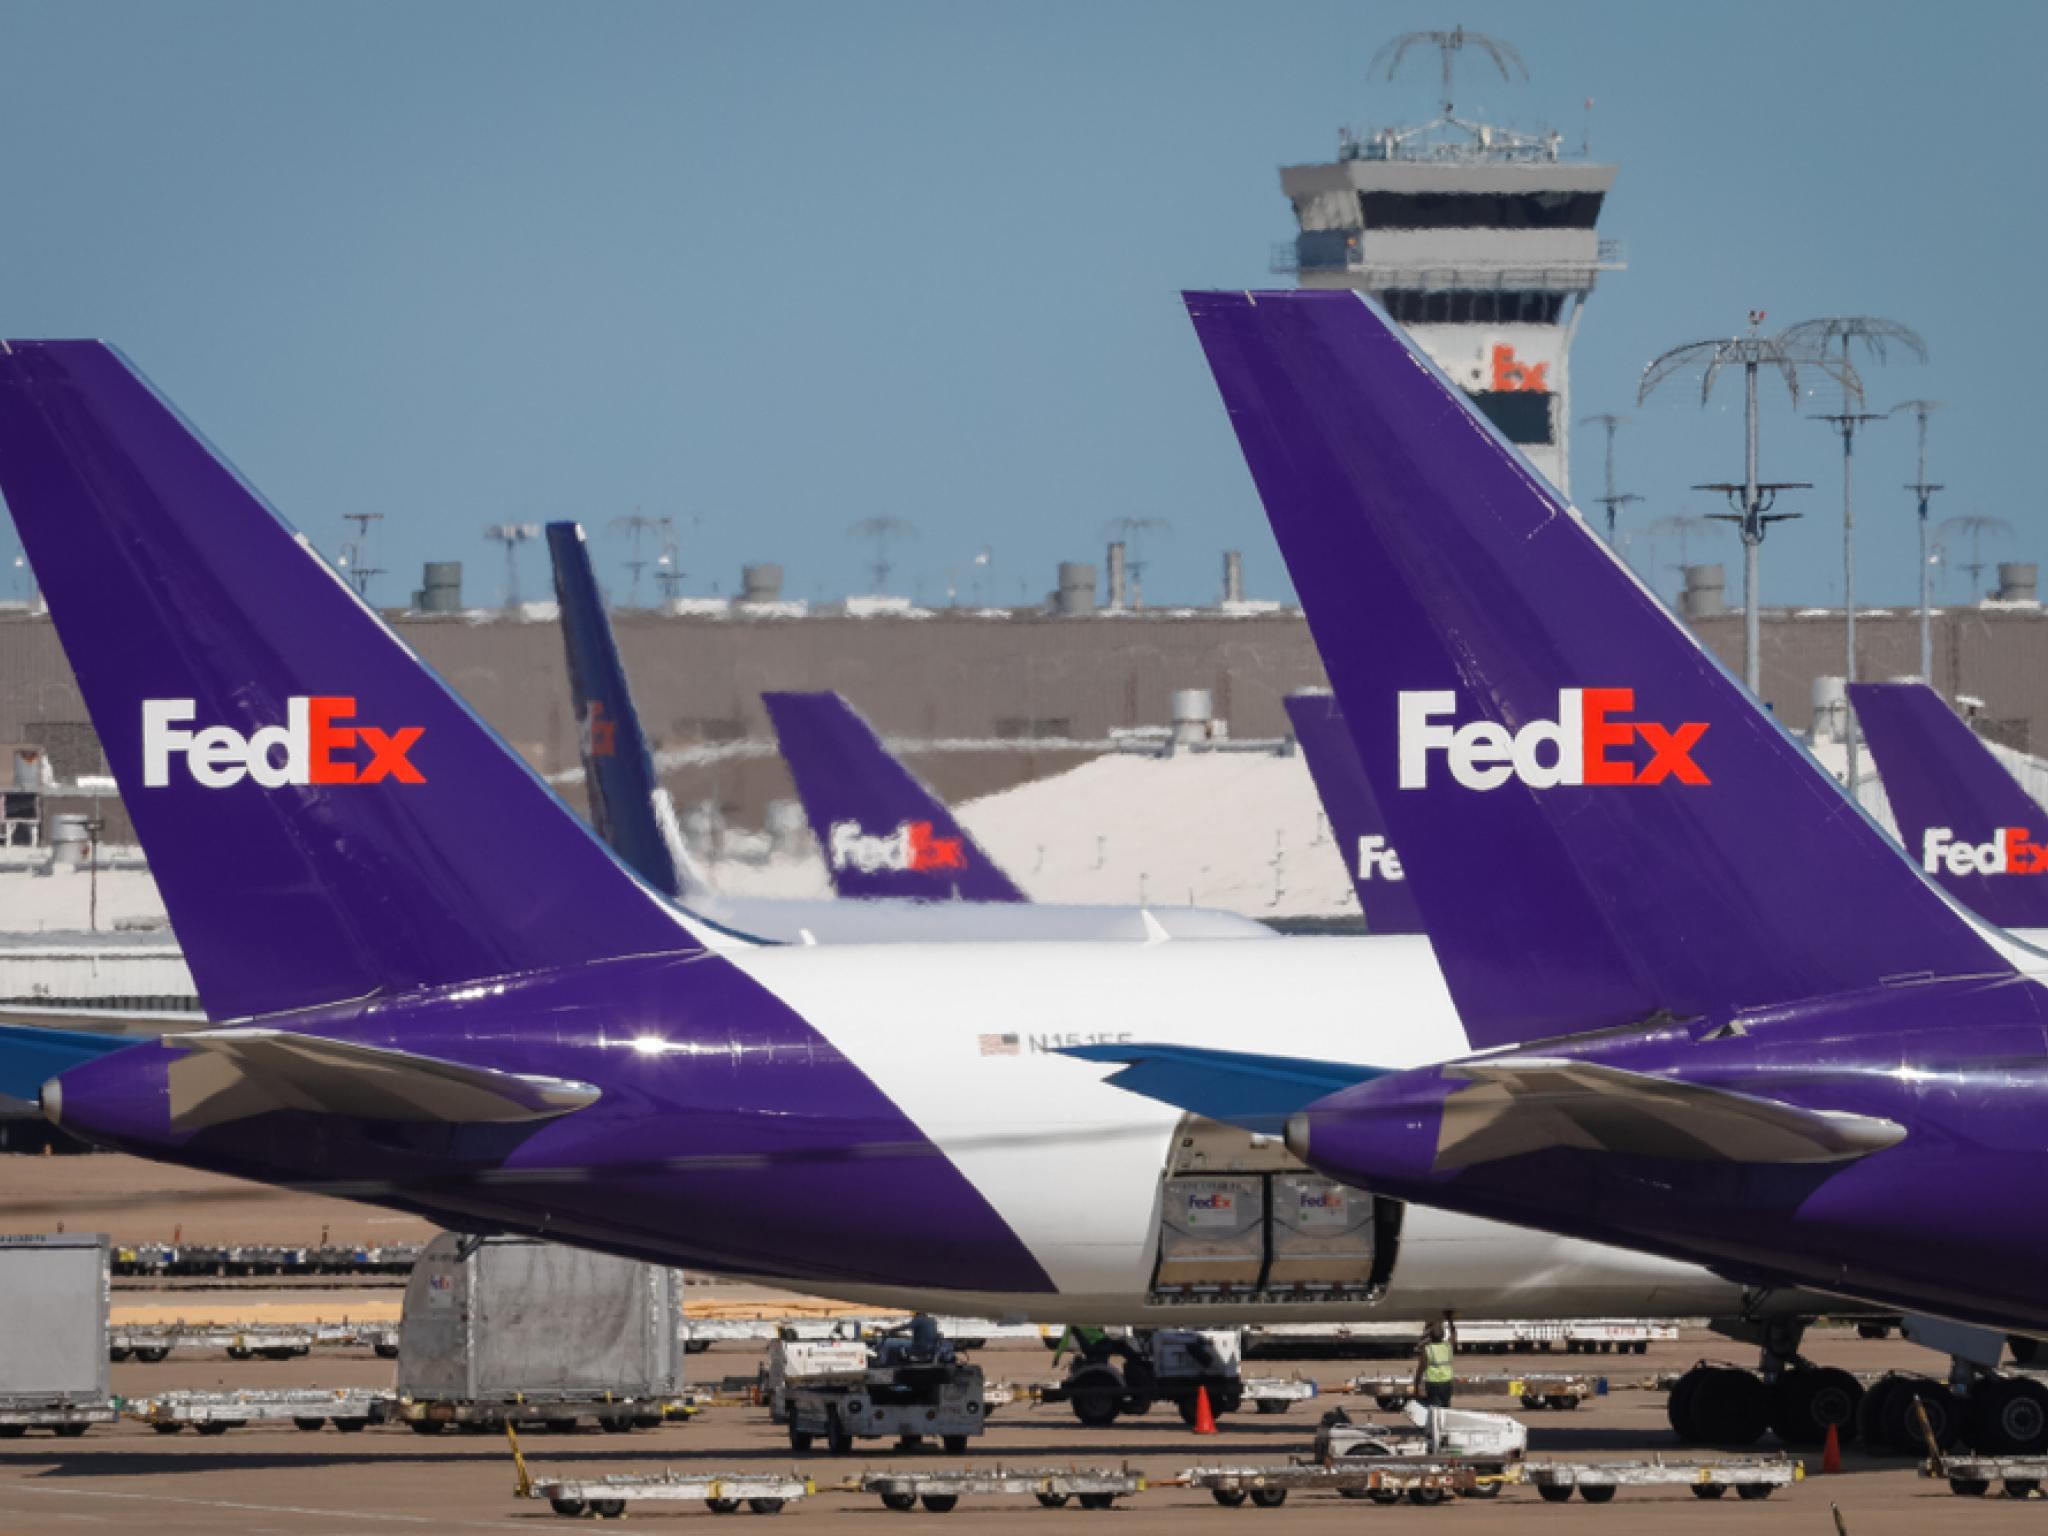  fedex-restores-priority-services-to-kyiv-amid-ukraine-crisis-russian-belarusian-operations-remain-suspended 